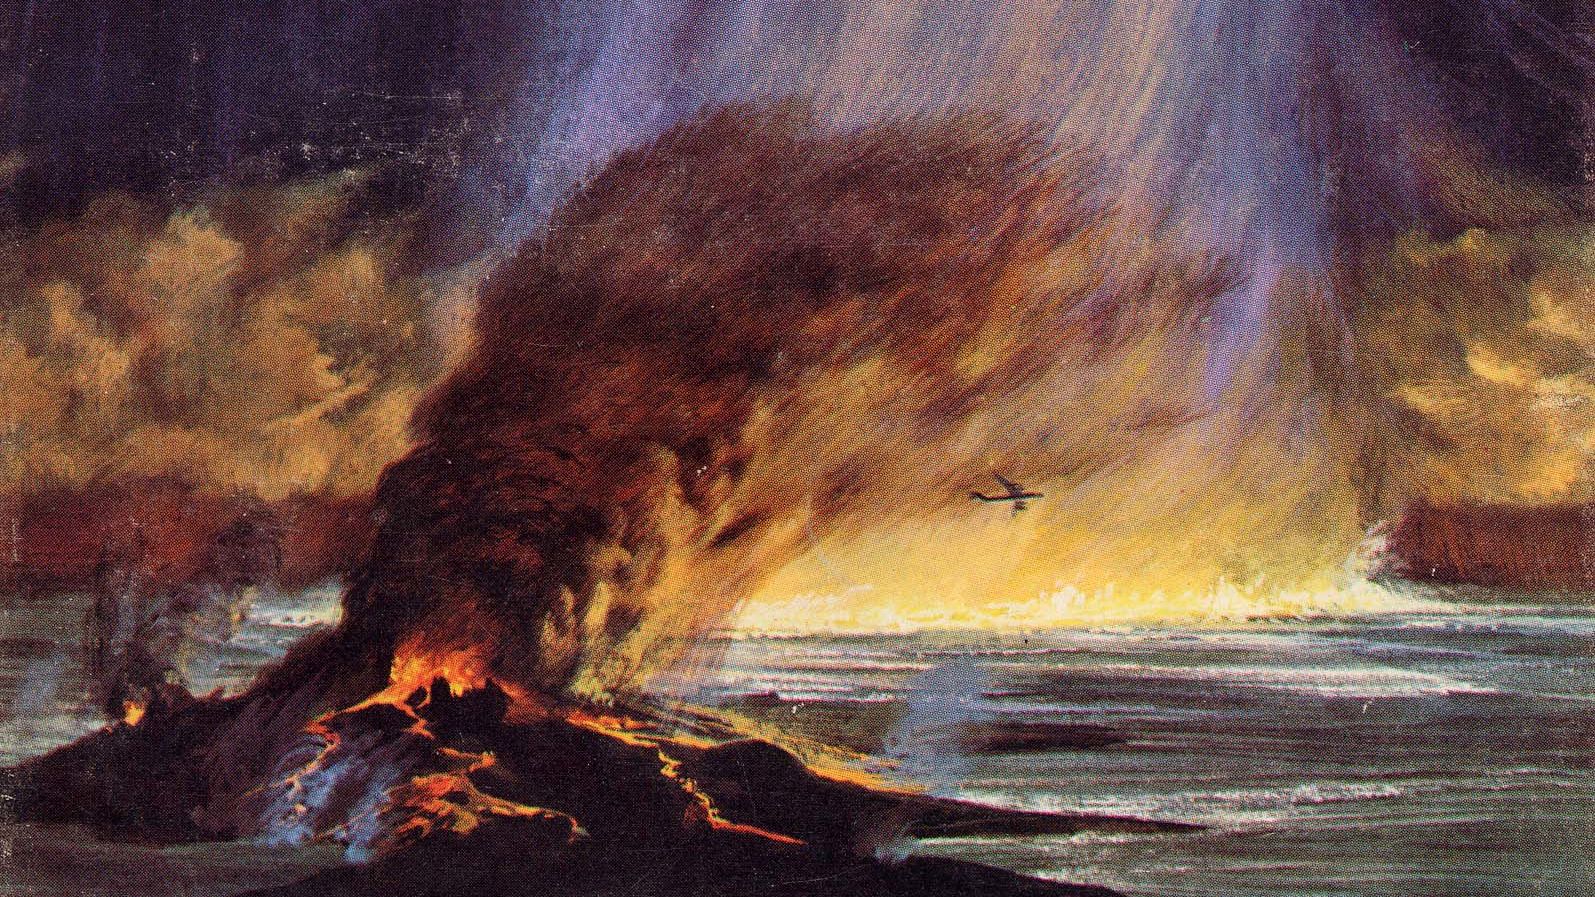 The March 1966 cover of  Analog Science Fiction/Science Fact featured an illustration of an asteroid hitting Earth.  J.E. Enever published his ground-breaking article, "Giant Meteor Impact," in this issue, detailing what such strikes could do, and have done, to the Earth, with vivid prose and terrifying physics.